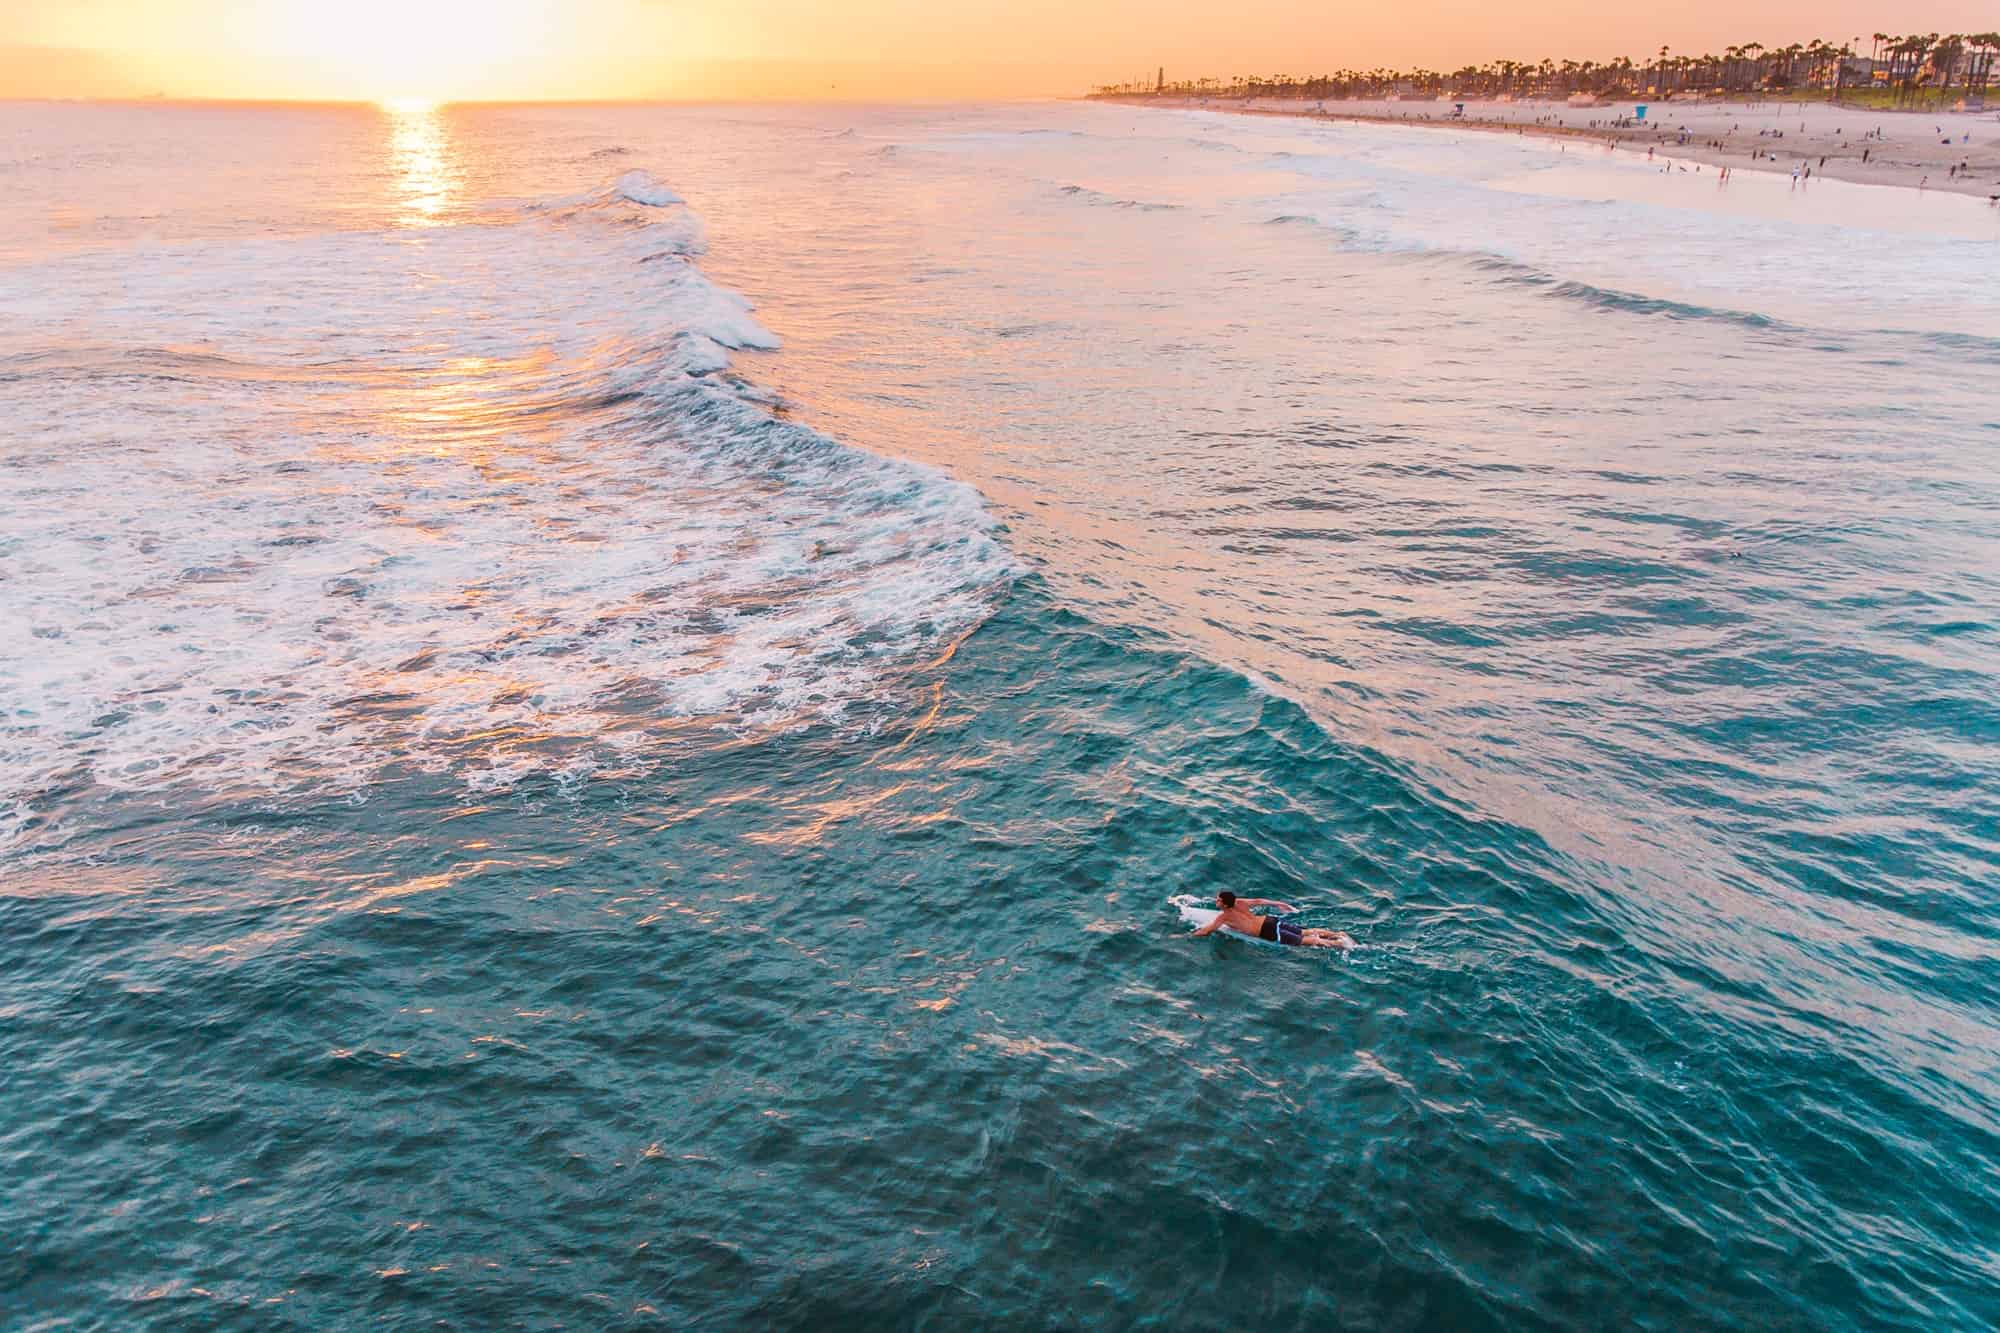 a surfer lays on his board paddling in the ocean waves at huntington beach